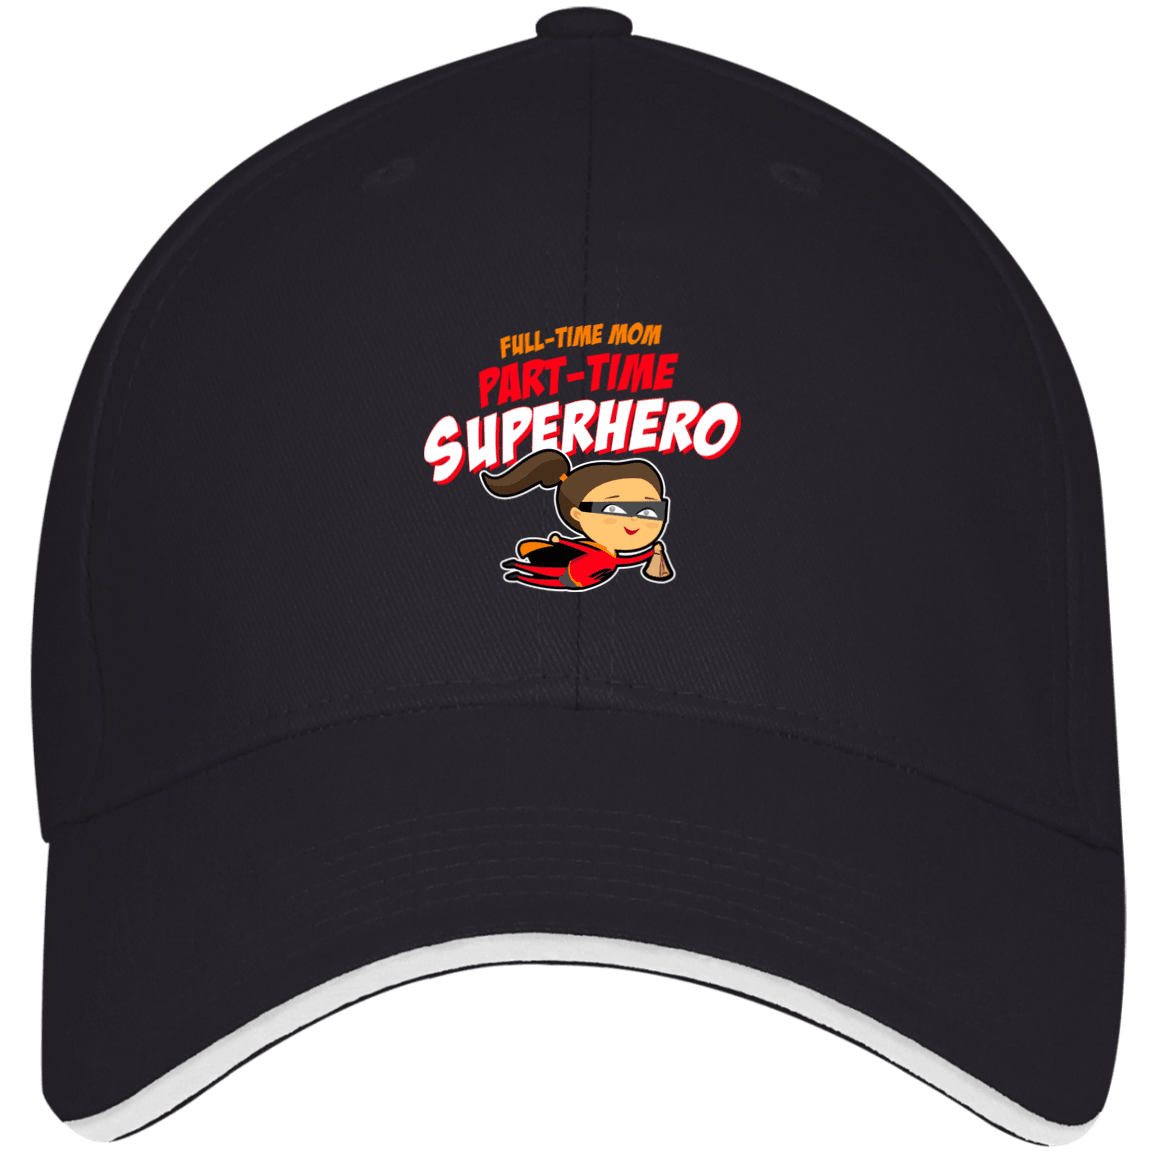 Designs by MyUtopia Shout Out:Full-time Mom Part-Time Superhero USA Made Structured Twill Cap With Sandwich Visor,Navy/White / One Size,Hats